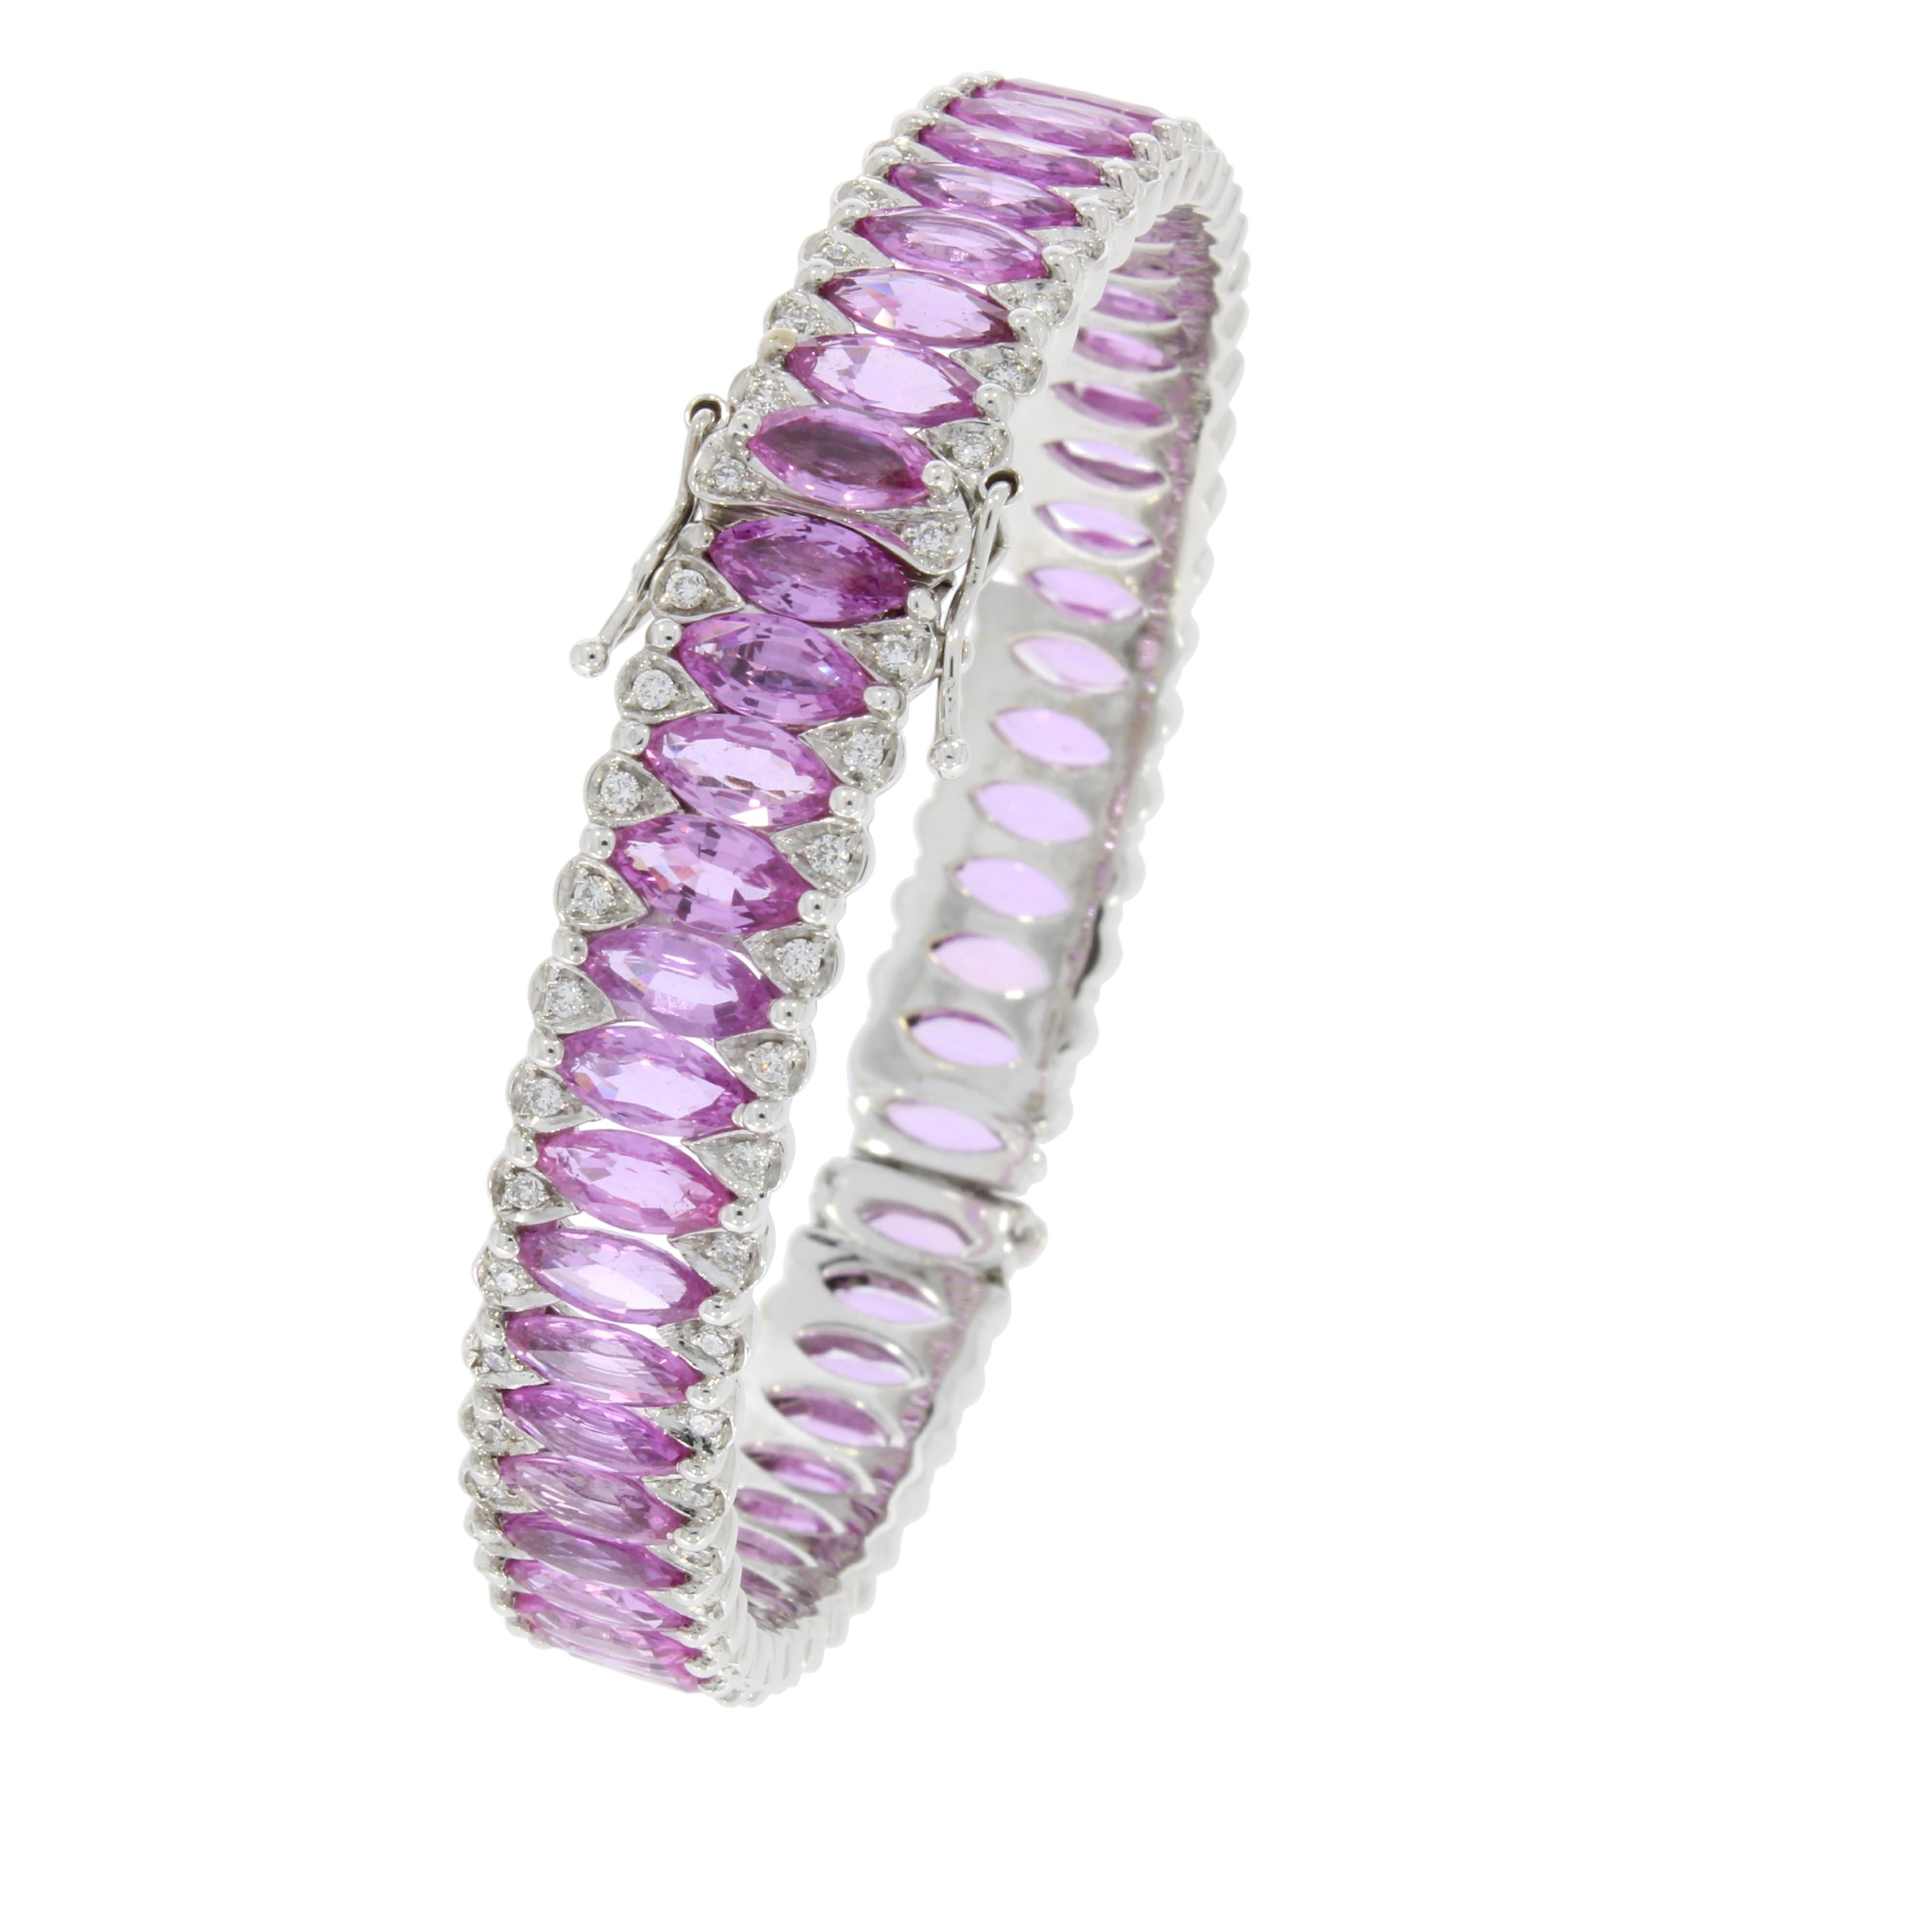 A perpetual circle of vibrant marquise cut pink sapphires poised between two delicate rows of brilliant cut diamonds fluidly wraps around the wrist.

- 18 karat White Gold
- 22.26 Carat Marquise cut Pink Sapphire
- 1.06 Carat Diamond

 5.85 cm